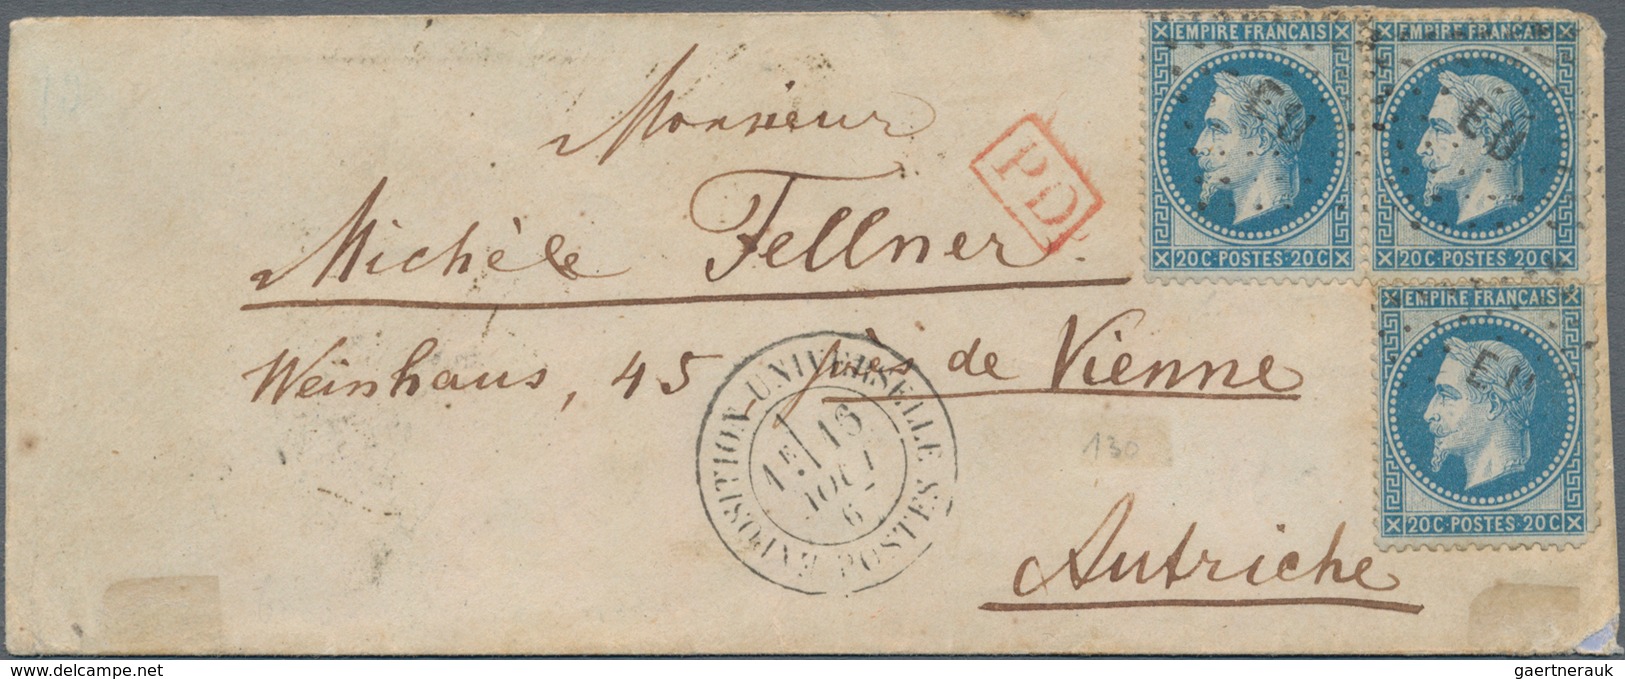 Frankreich: 1867 EXPOSITION UNIVERSELLE In Paris: Small Cover Sent From The Exposition To Austria, F - Unused Stamps